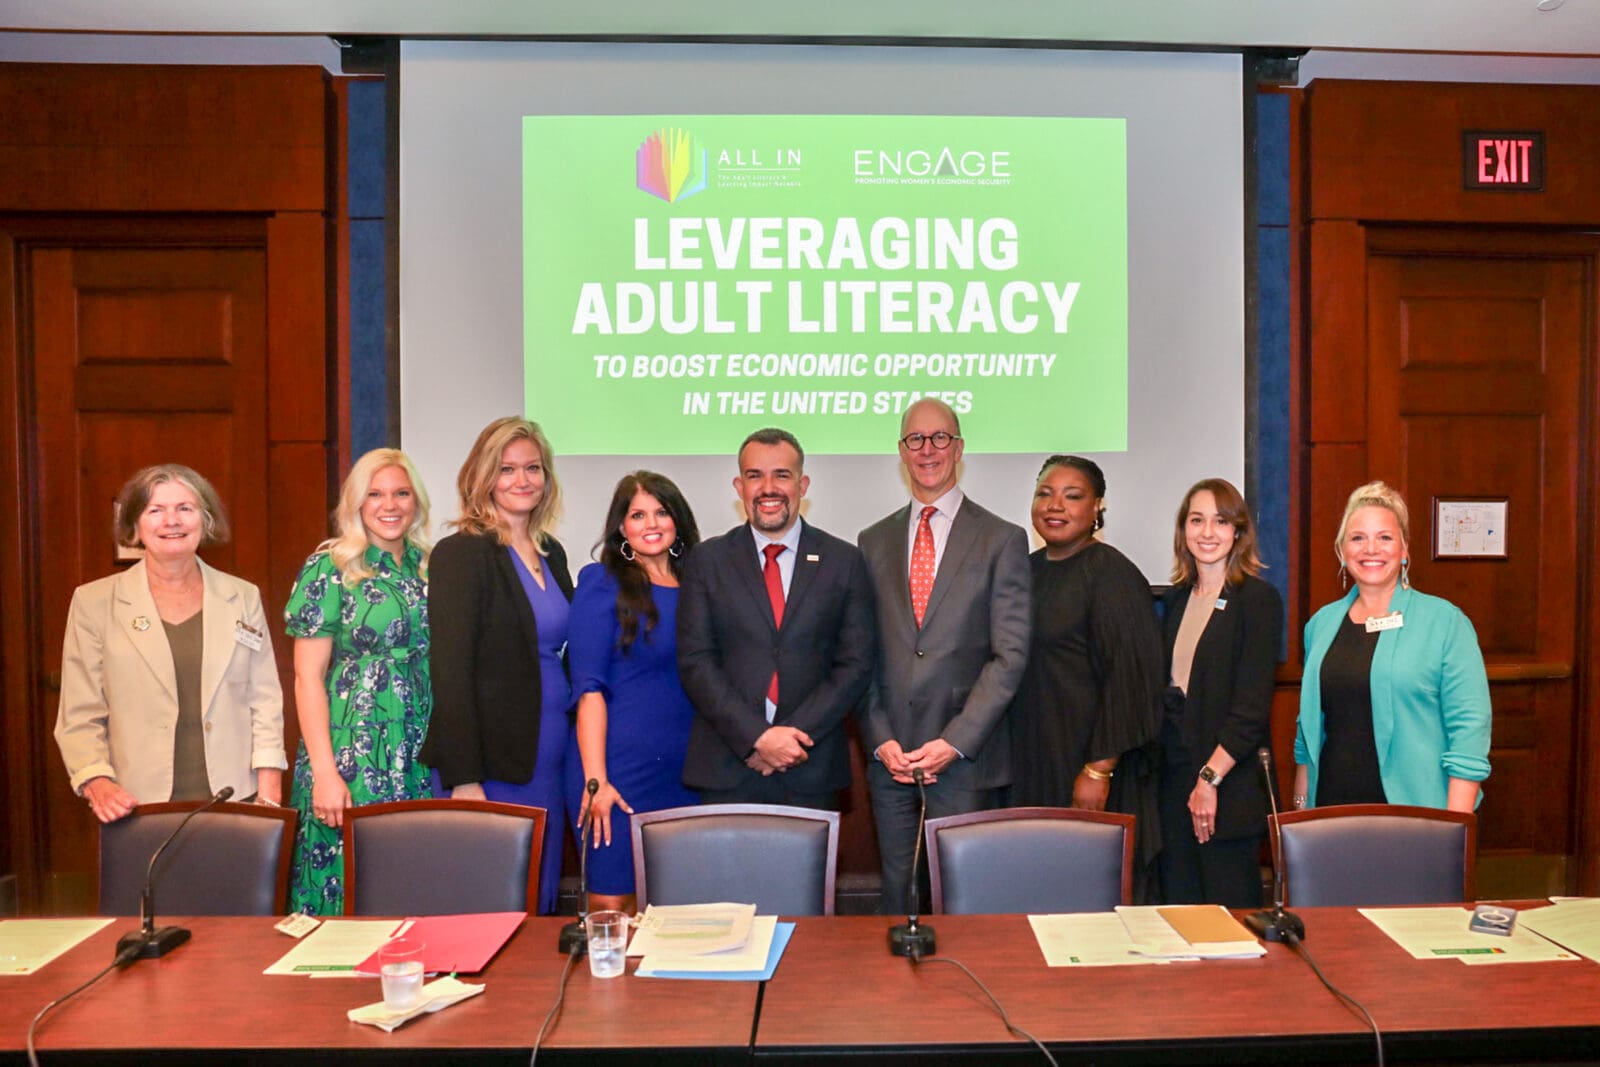 ALL IN and Engage Brief U.S. Senate on Adult Literacy’s Link to Economic Opportunity